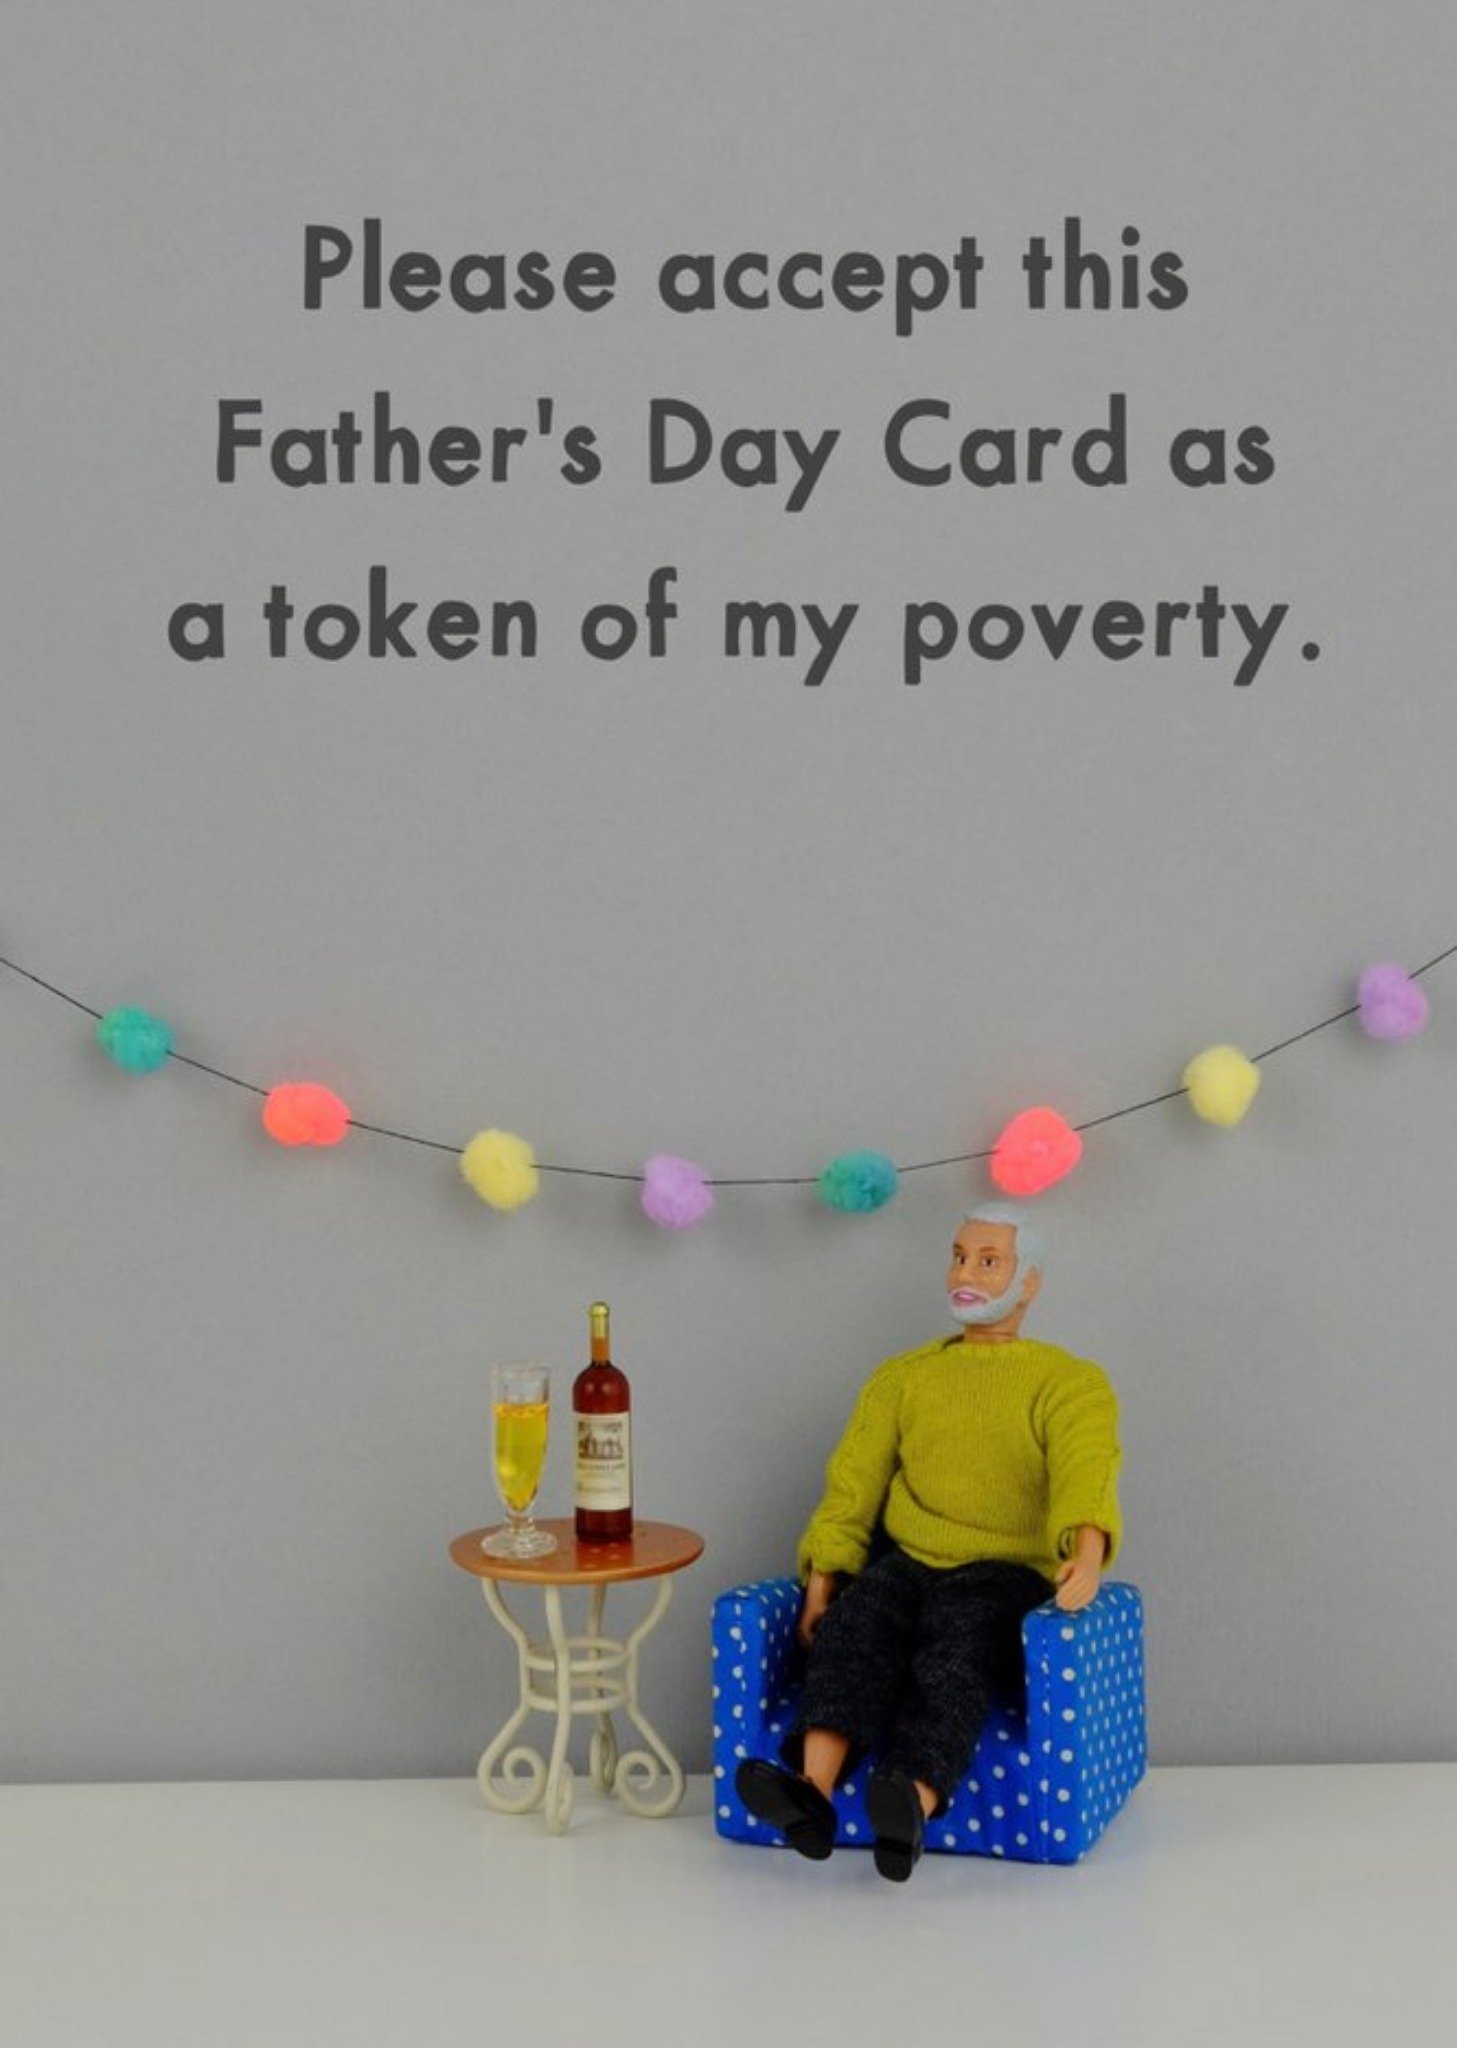 Bold And Bright Funny Rude Please Accept This Fathers Day Card As A Token Of My Poverty Card Ecard